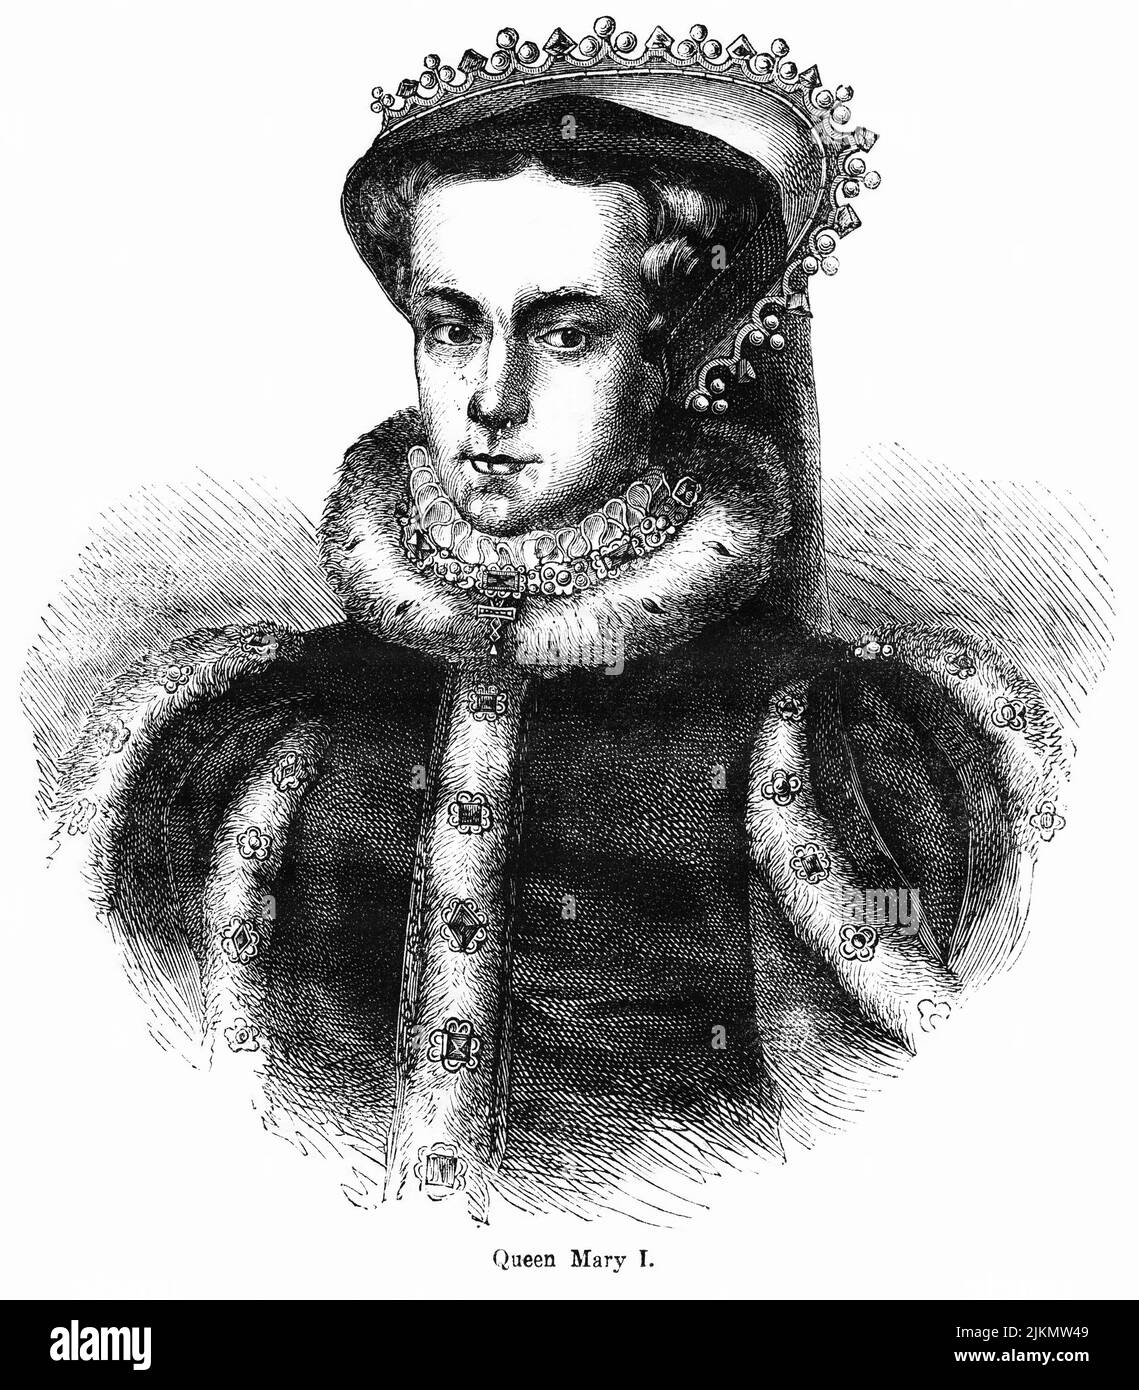 Queen Mary I, Illustration from the Book, 'John Cassel’s Illustrated History of England, Volume II', text by William Howitt, Cassell, Petter, and Galpin, London, 1858 Stock Photo